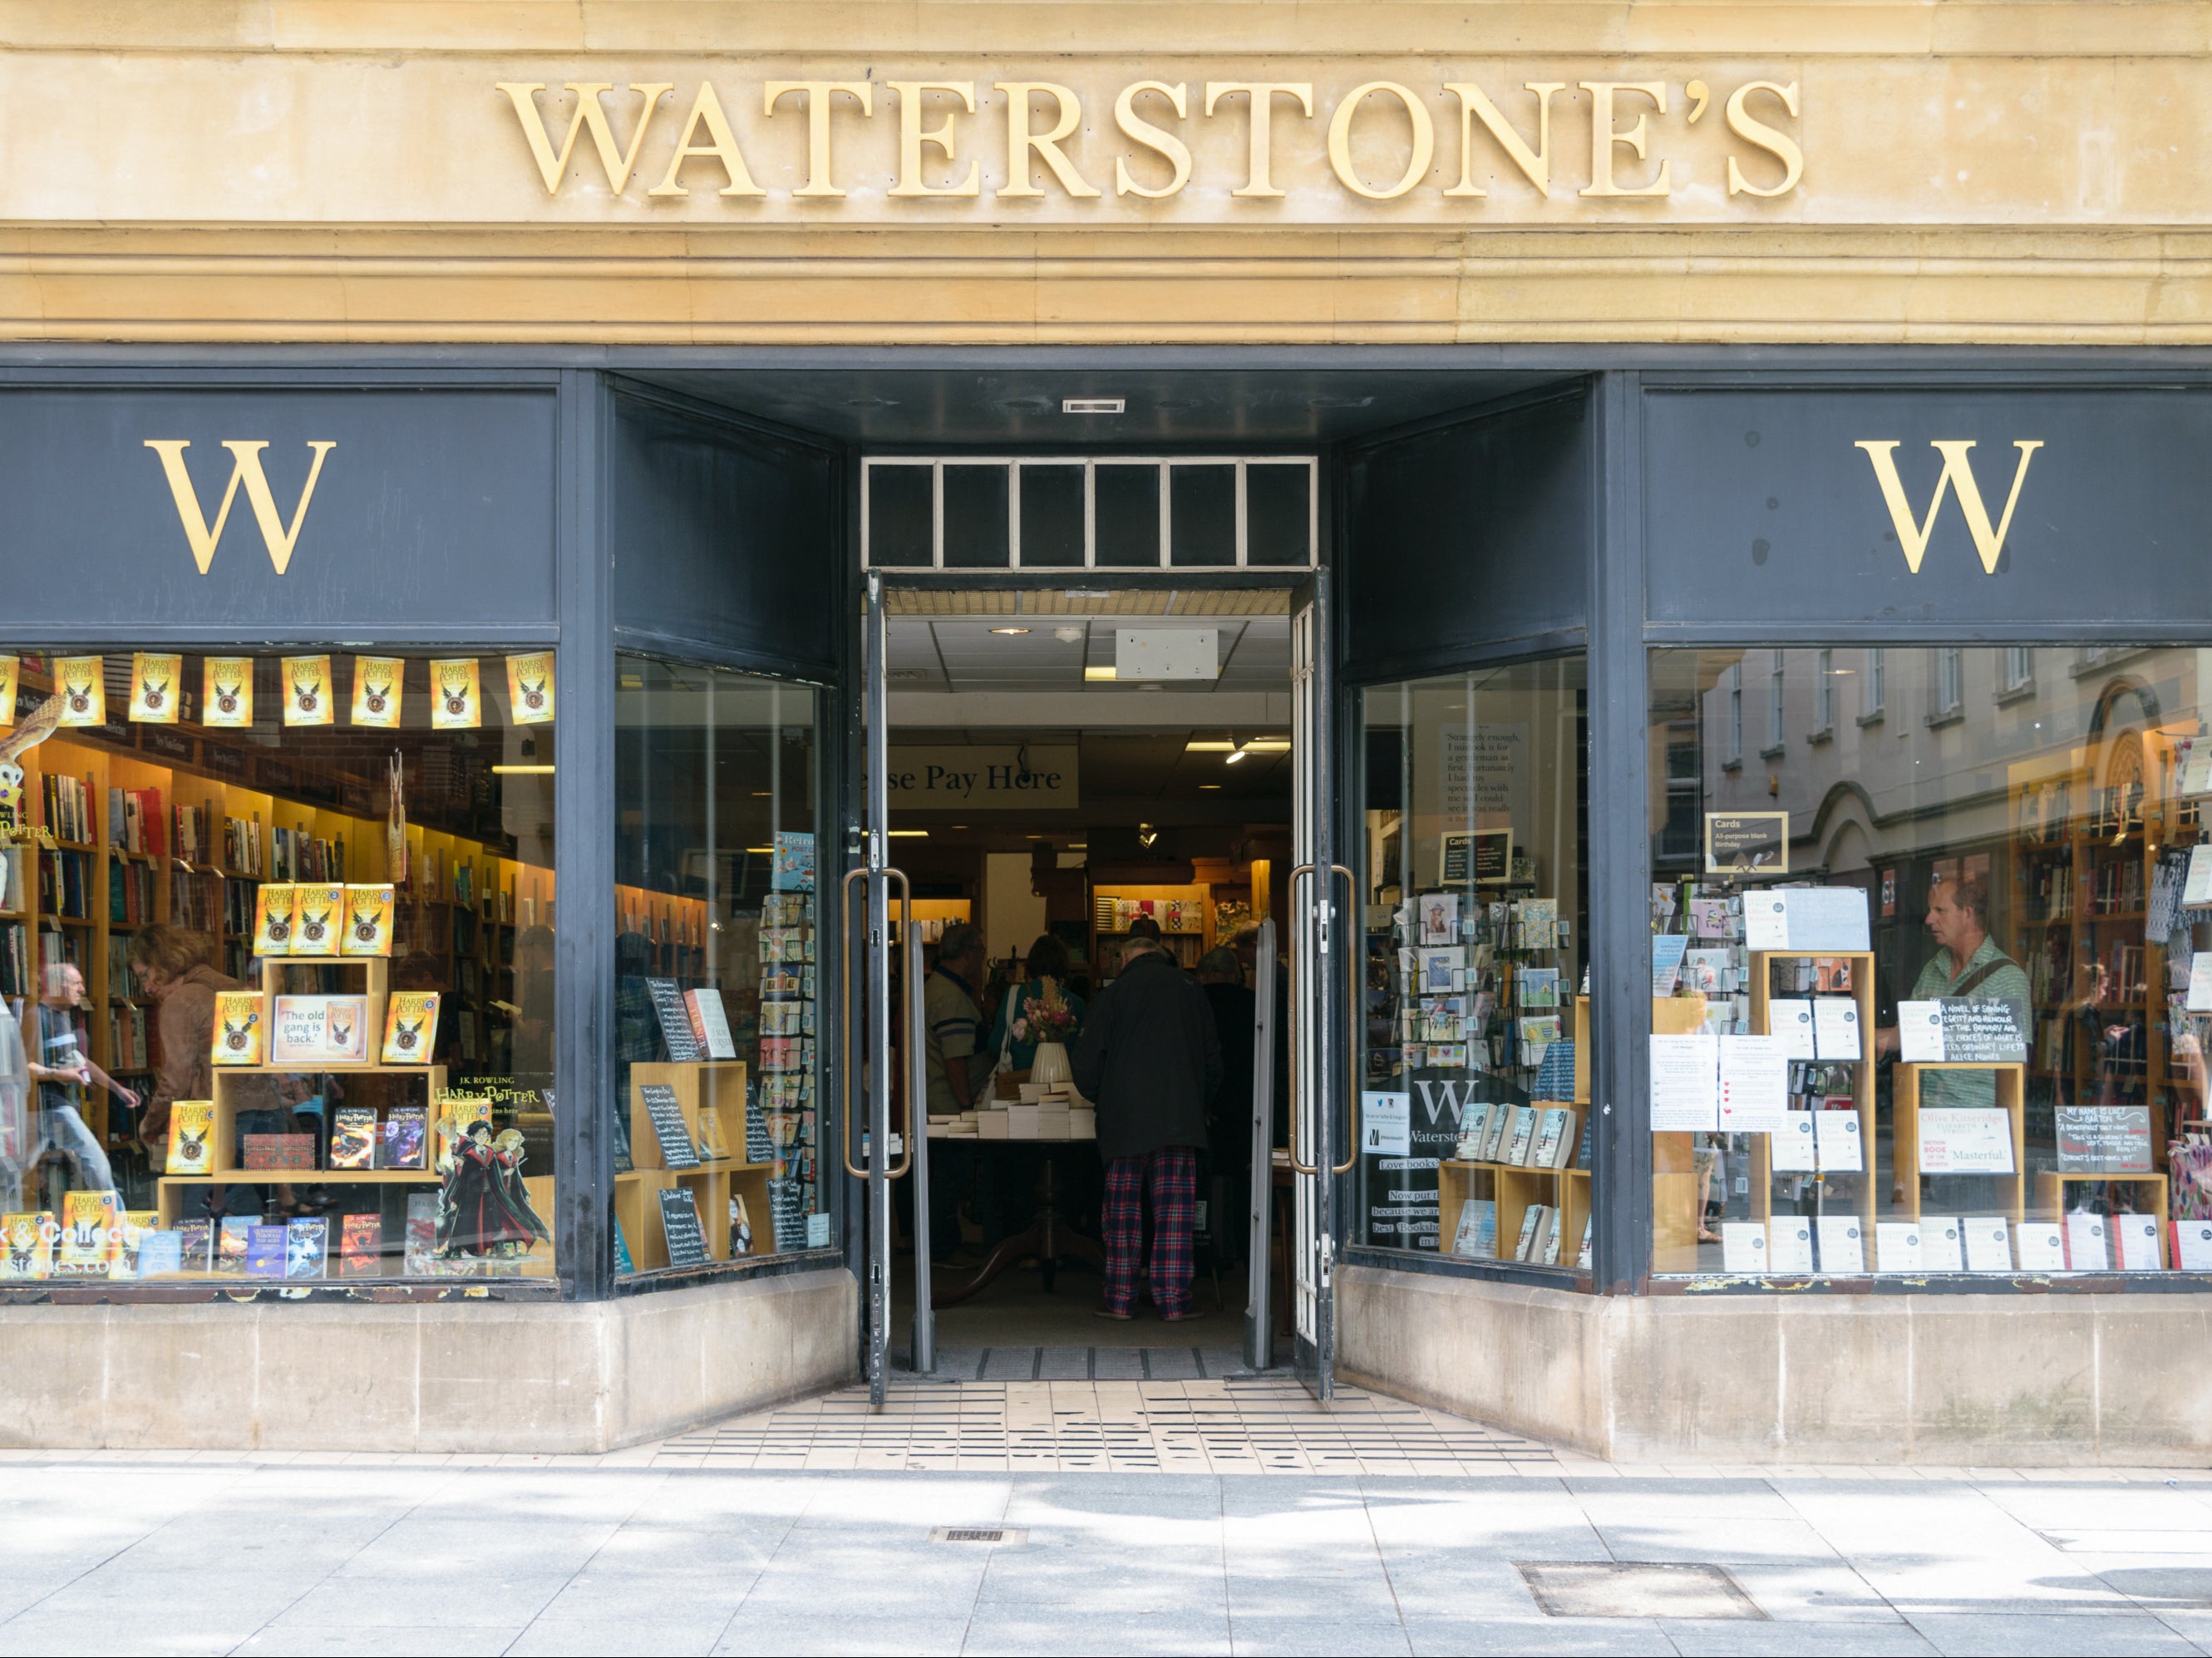 A Waterstones bookstore in Exeter